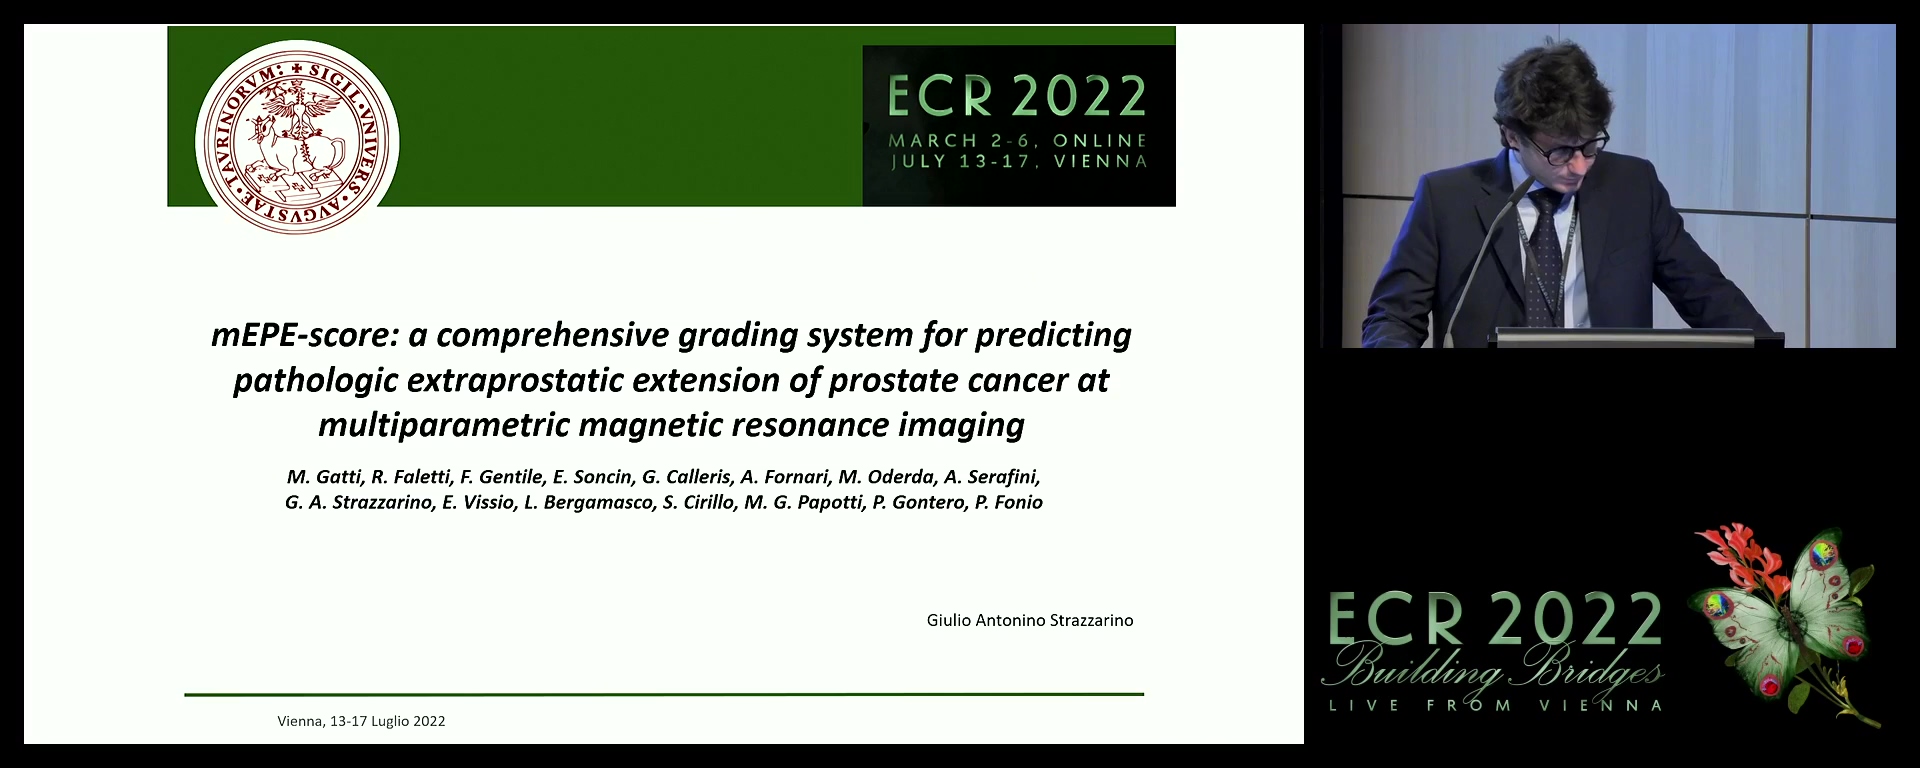 EPE-score: a comprehensive grading system for predicting pathologic extraprostatic extension of prostate cancer at multi-parametric magnetic resonance imaging